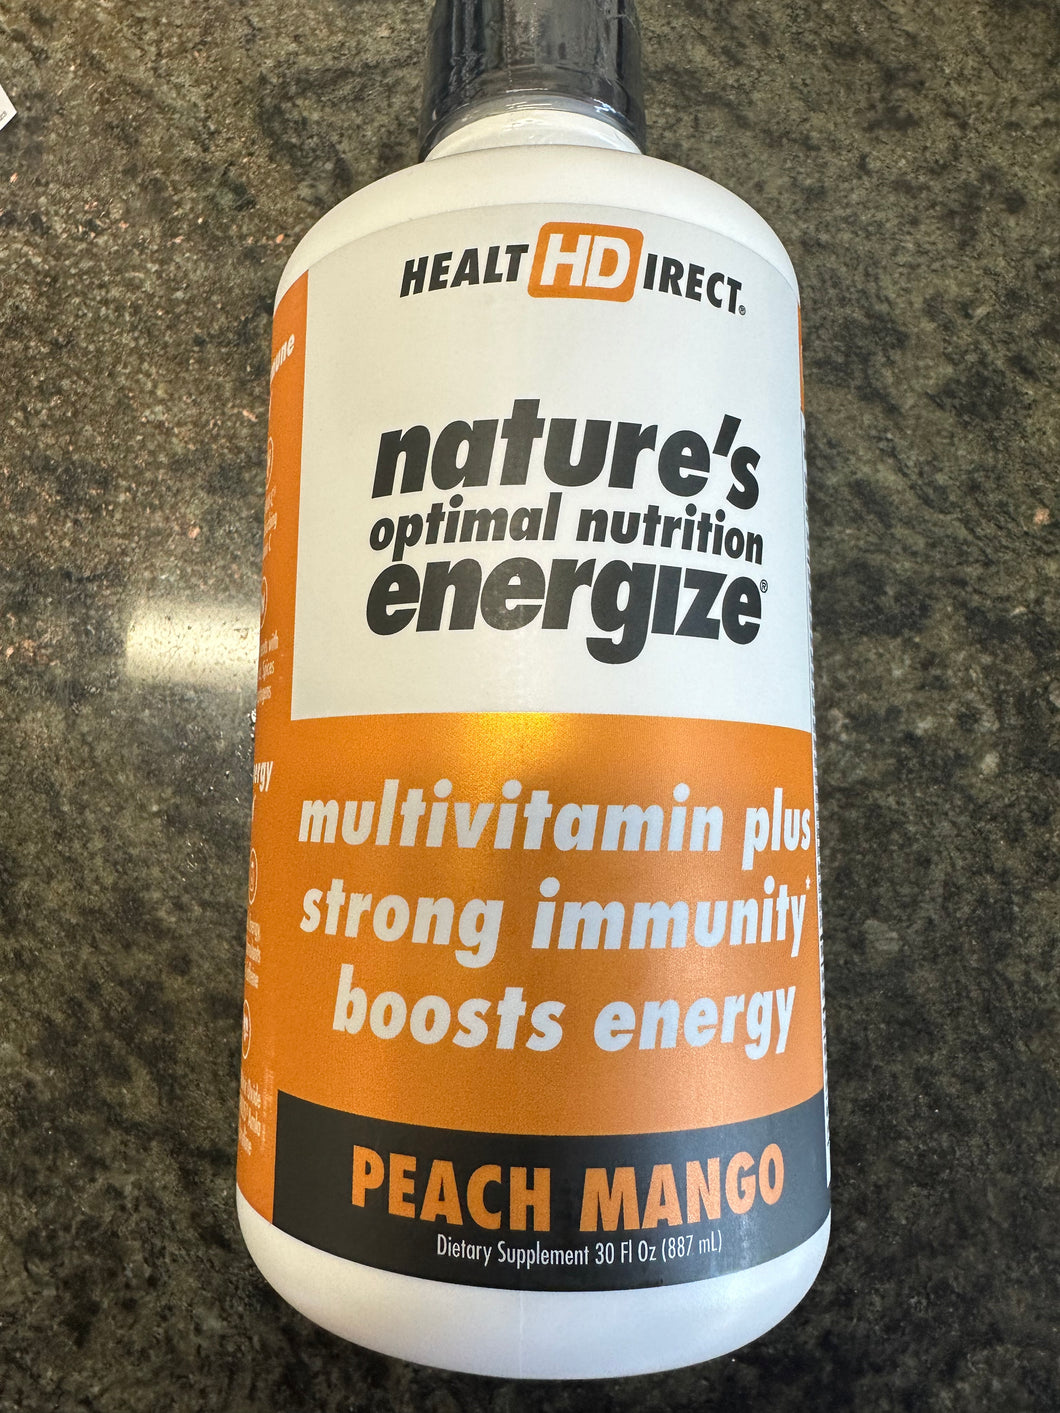 Health Direct Nature’s optimal Nutrition Energize!